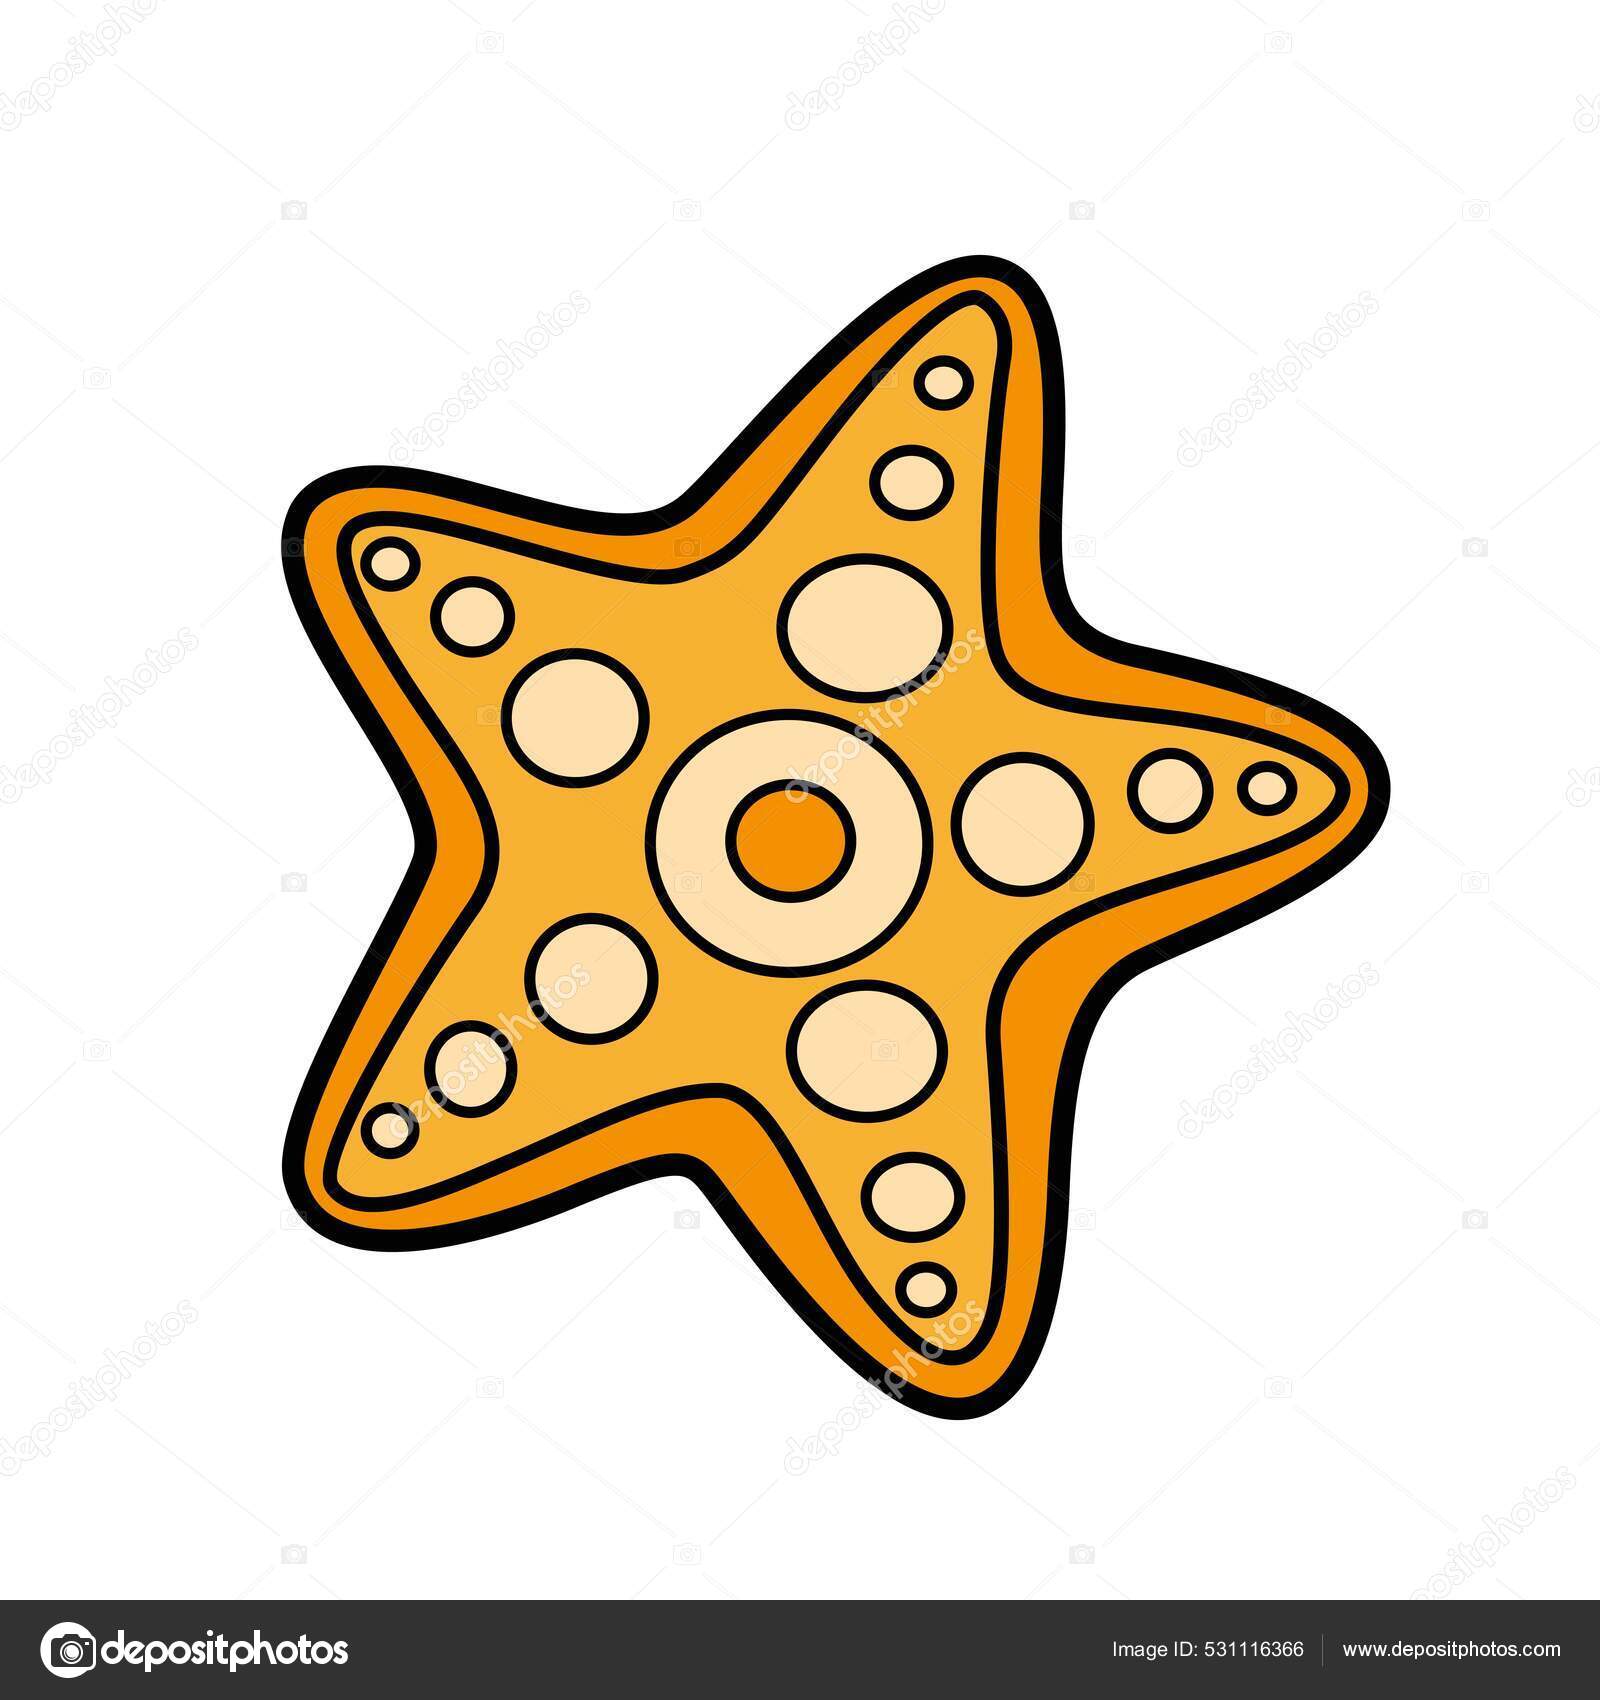 Starfish color variation coloring page isolated white background stock vector by yadviga